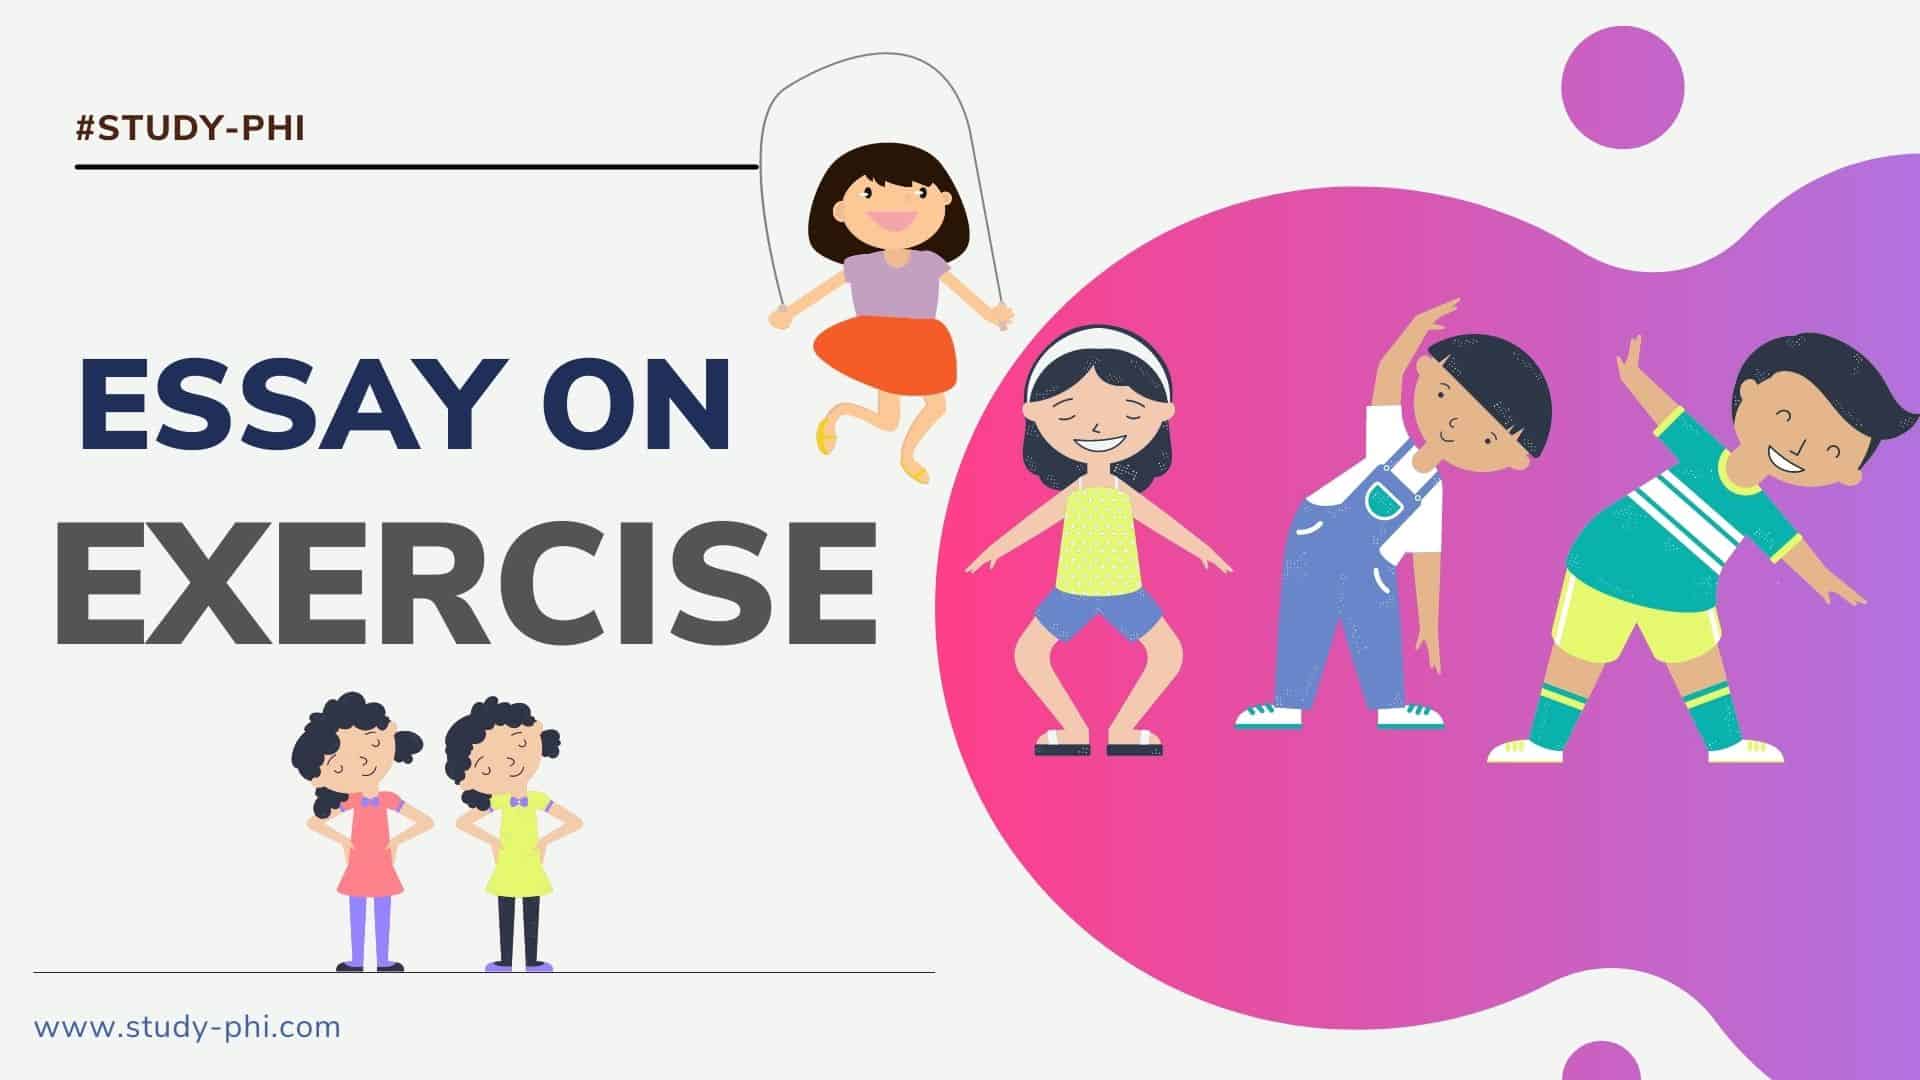 write a paragraph about the benefits of exercise